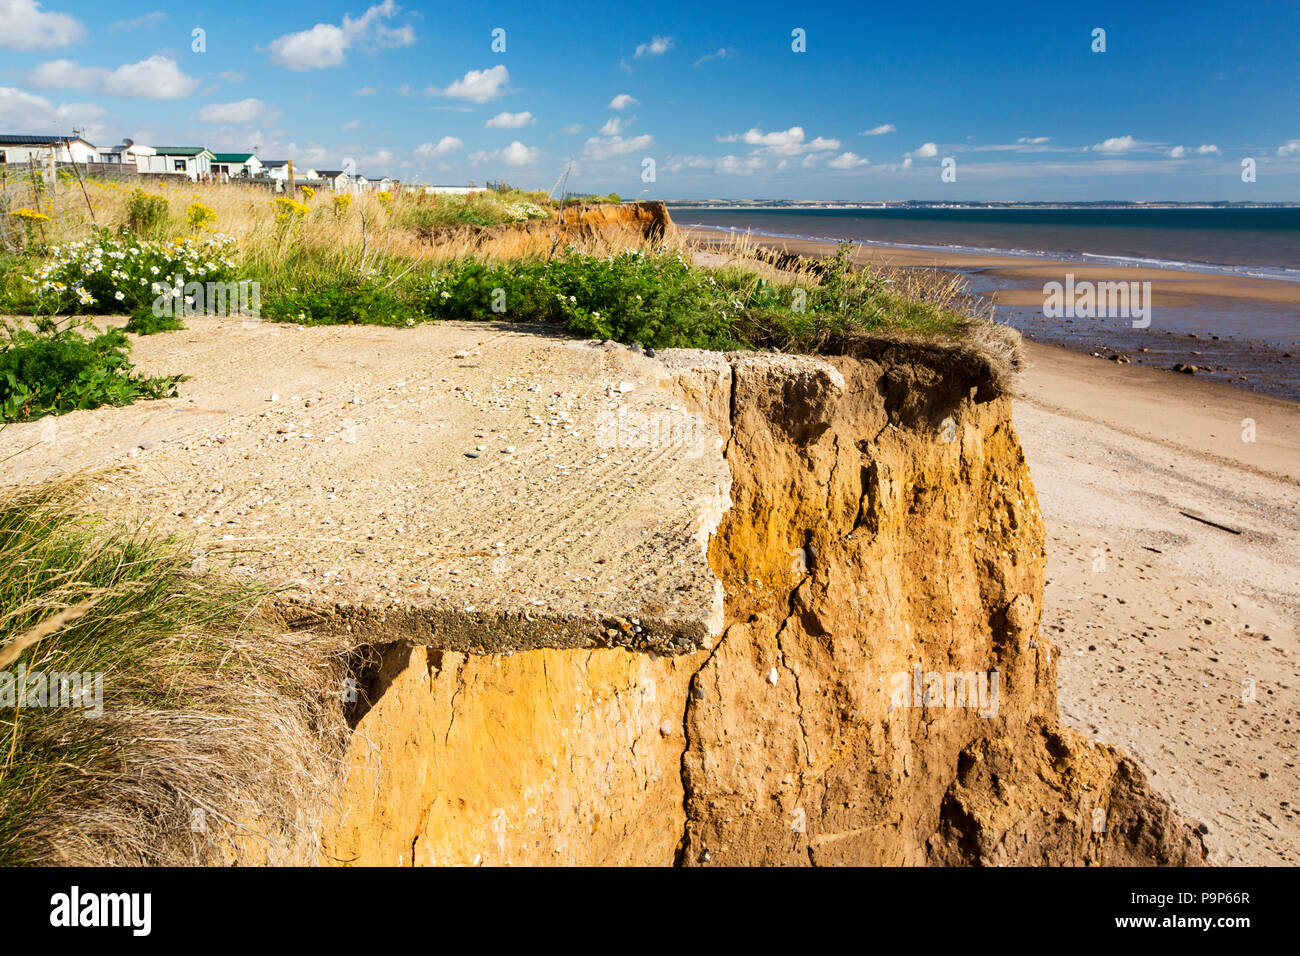 A collapsed concrete caravan base near Aldbrough on Yorkshires East Coast, near Skipsea, UK. The coast is composed of soft boulder clays, very vulnerable to coastal erosion. This section of coast has been eroding since Roman times, with many villages having disappeared into the sea, and is the fastest eroding coast in Europe. Climate change is speeding up the erosion, with sea level rise, increased stormy weather and increased heavy rainfall events, all playing their part. Stock Photo